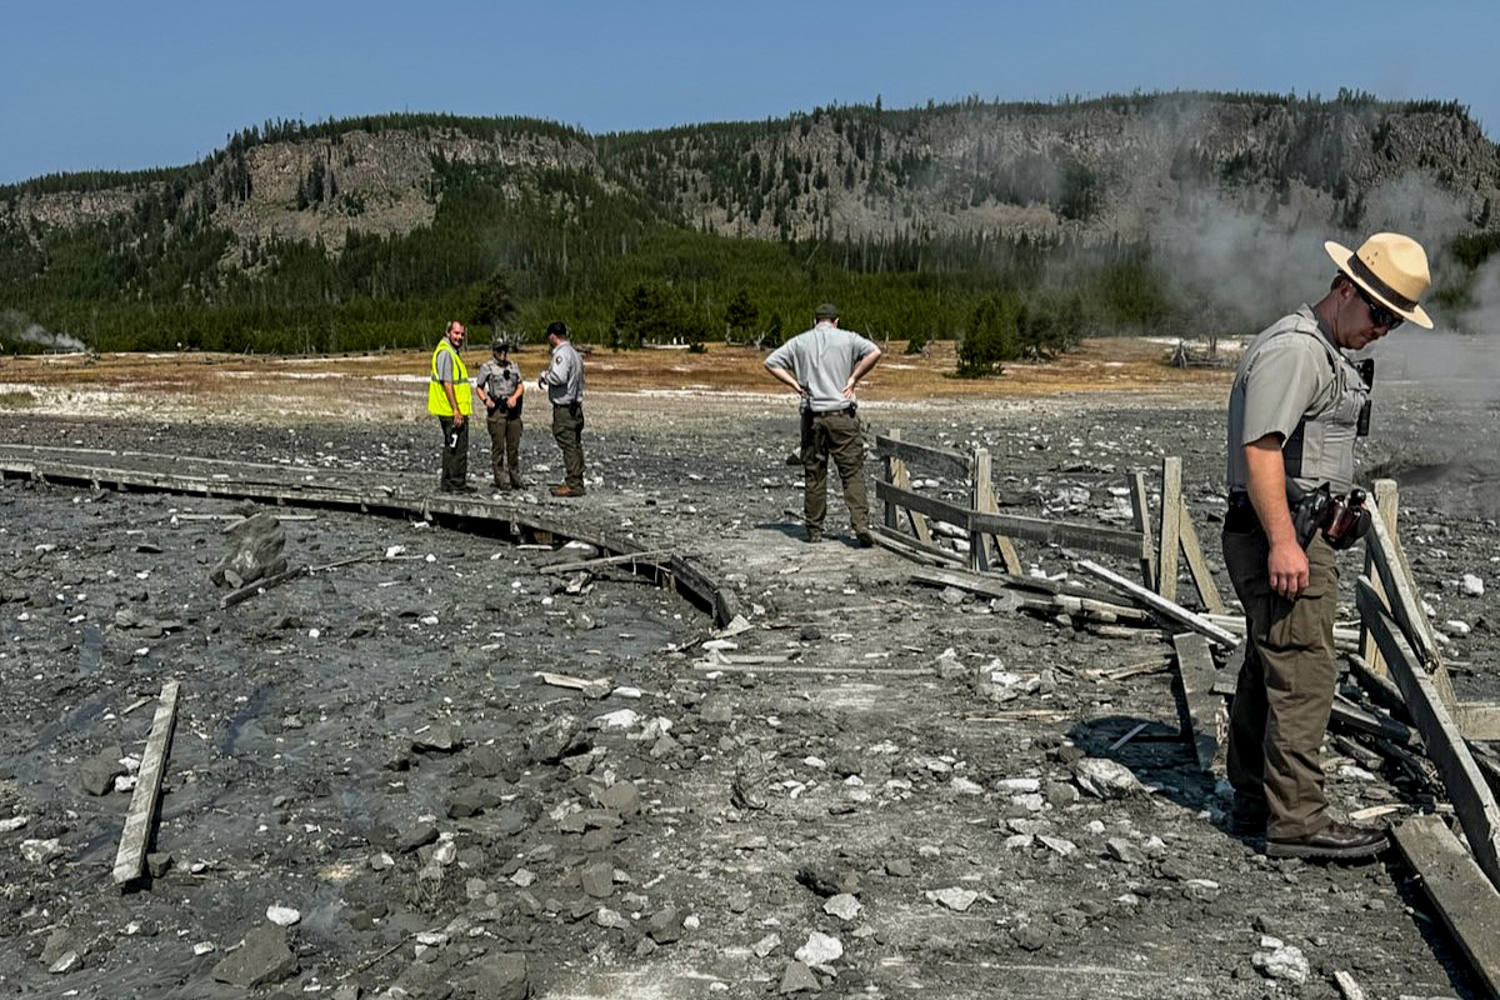 Hydrothermal explosion at Yellowstone sends up geyser of rock and steam